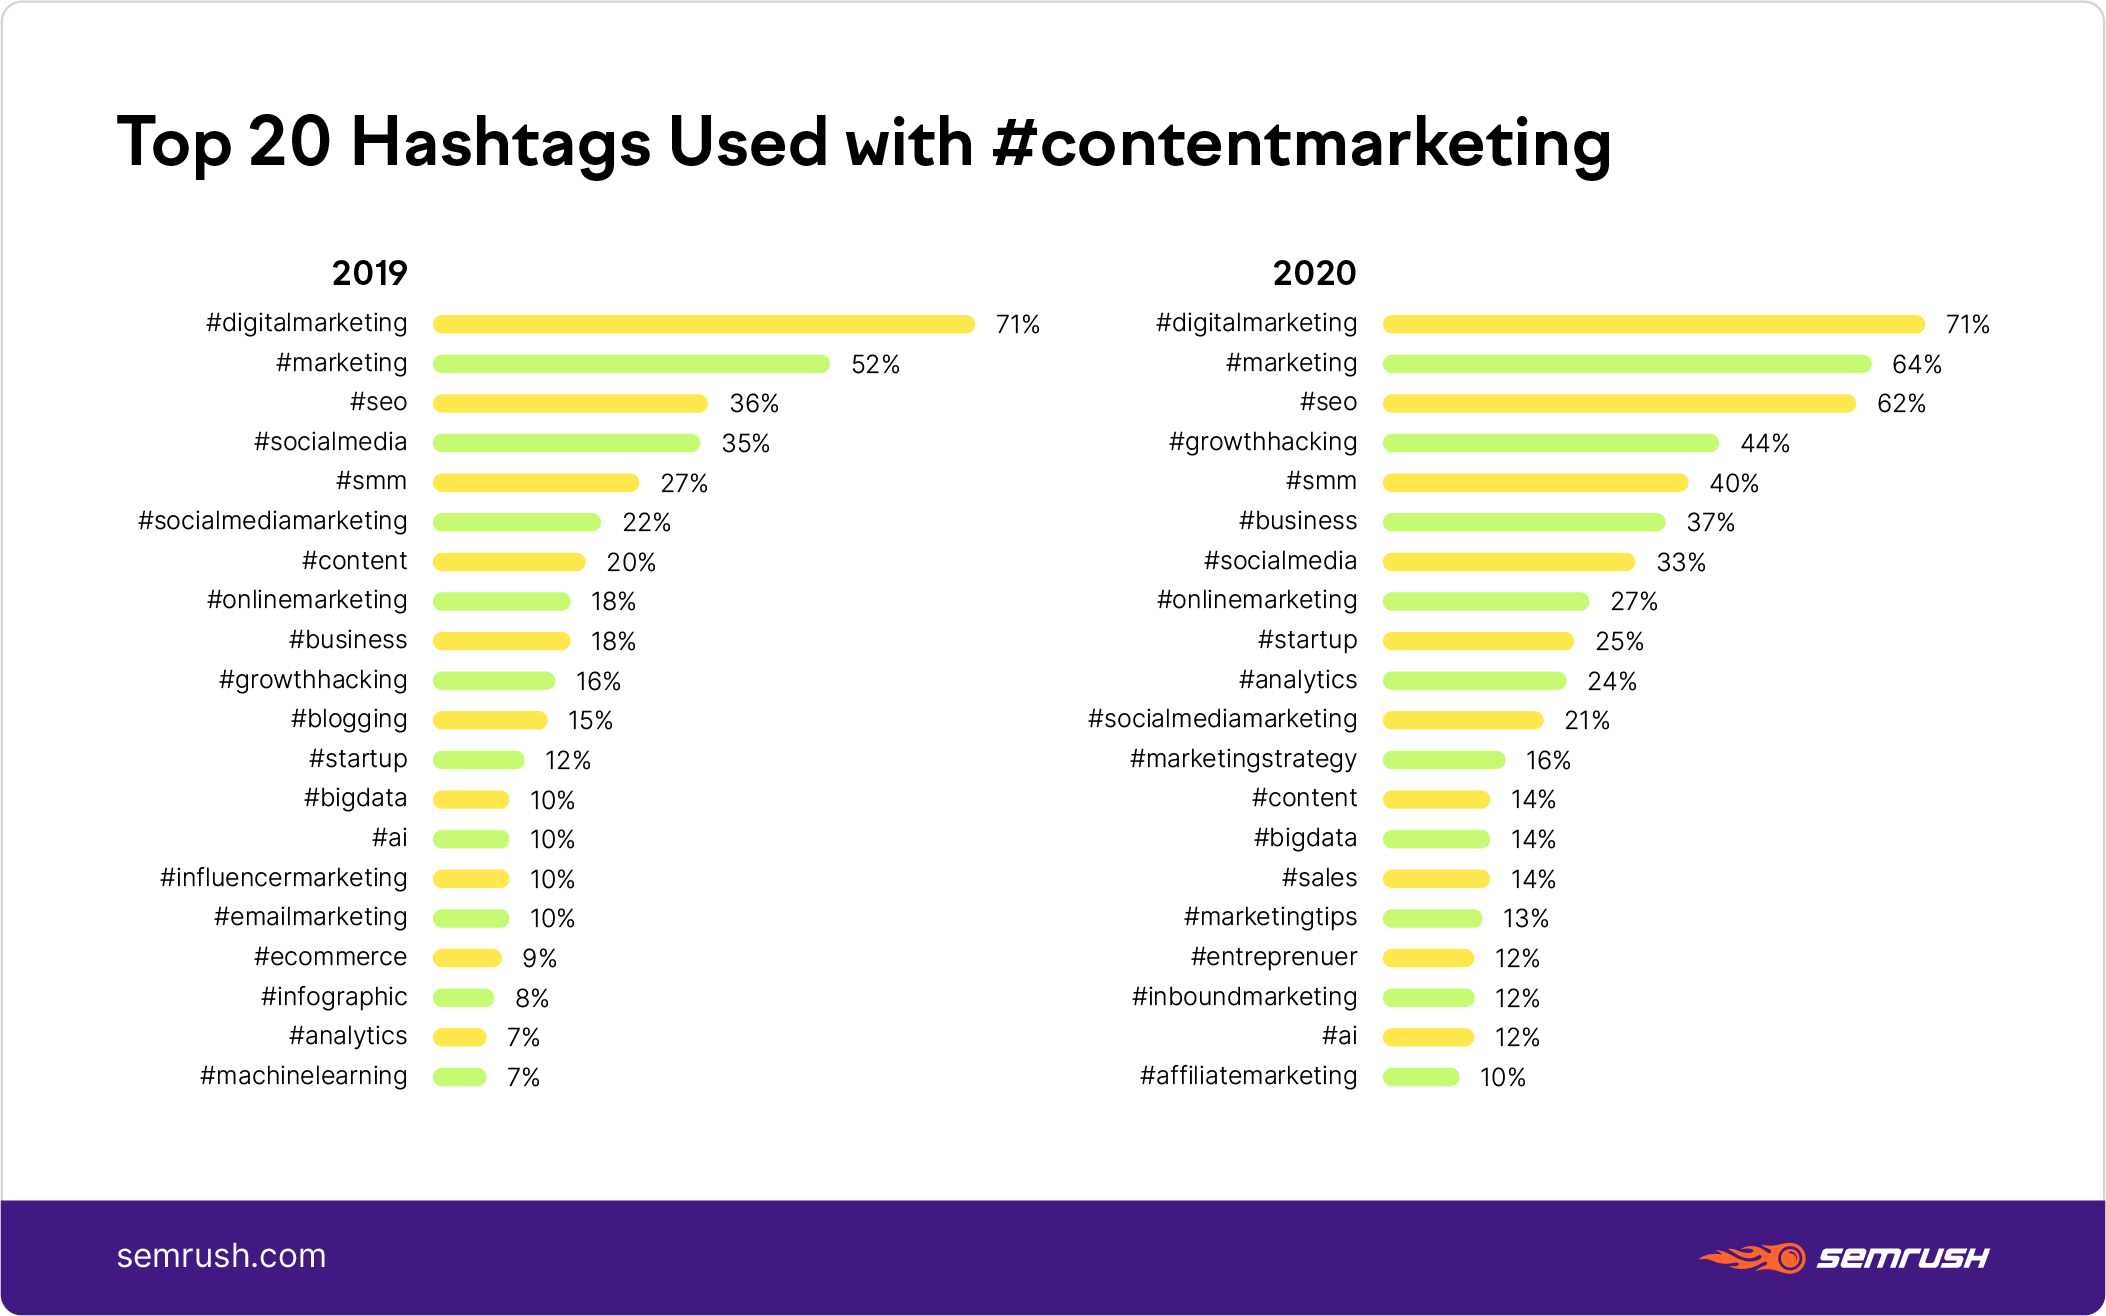 Top 20 content marketing related hashtags